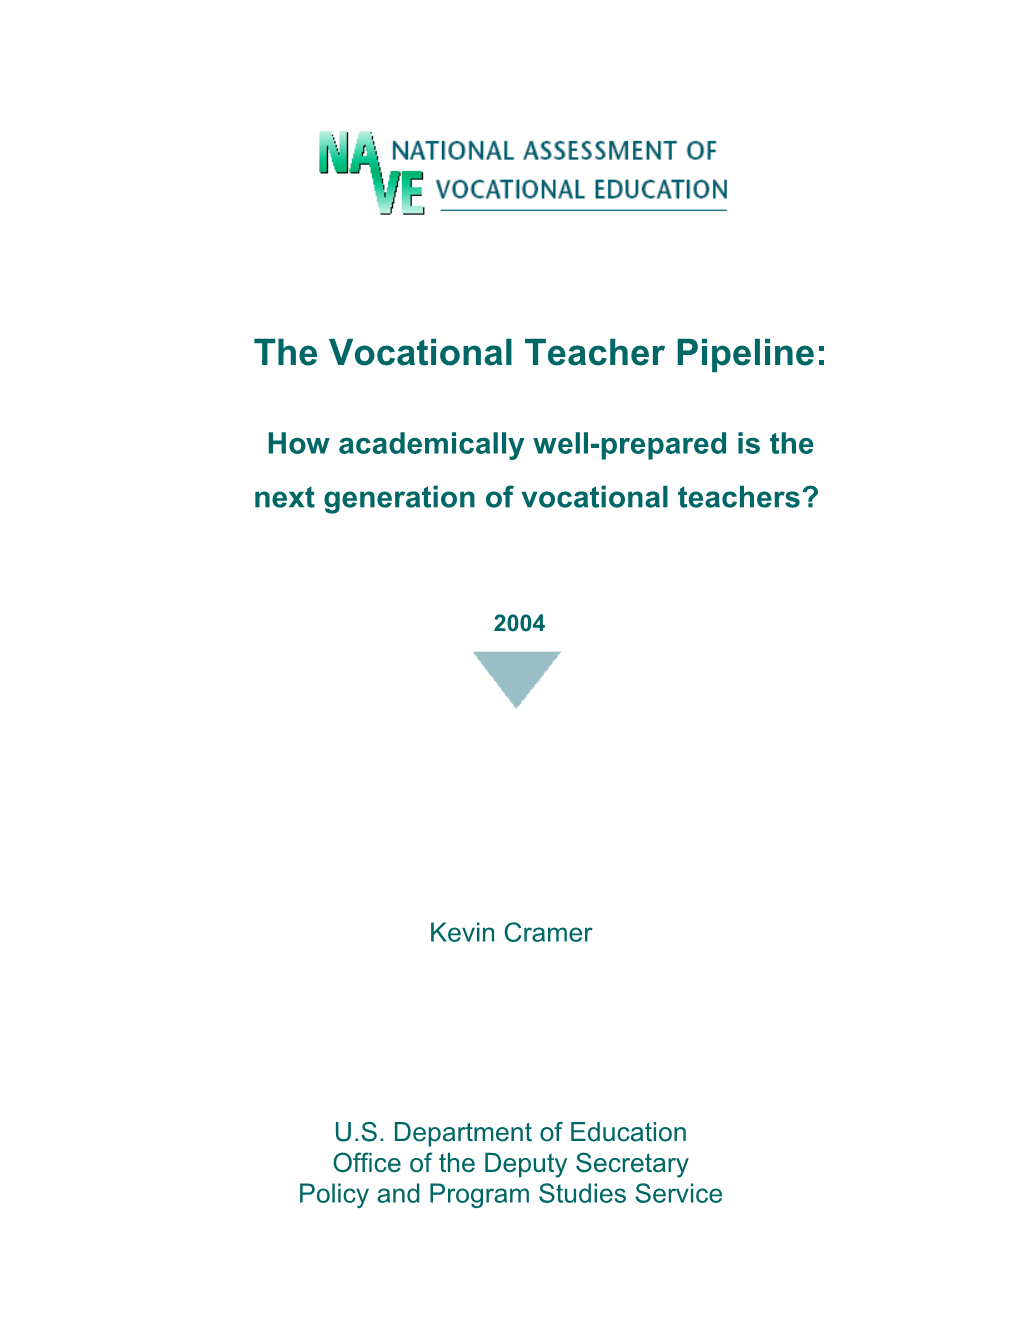 The Vocational Teacher Pipeline: How Academically Well-Prepared Is the Next Generation